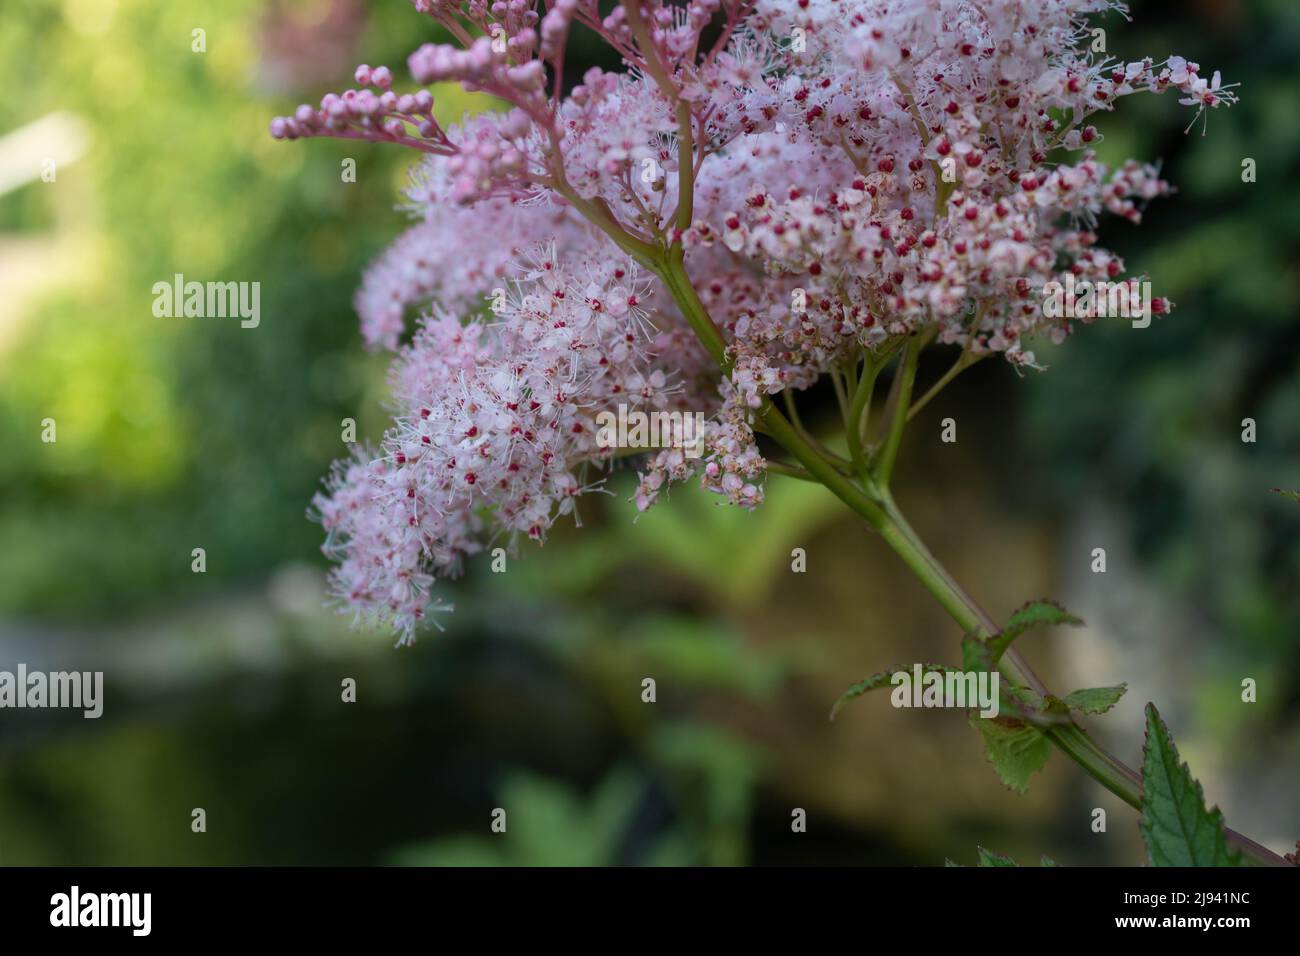 Blooming branch of french tamarisk (Tamarix gallica) against green background, close up Stock Photo